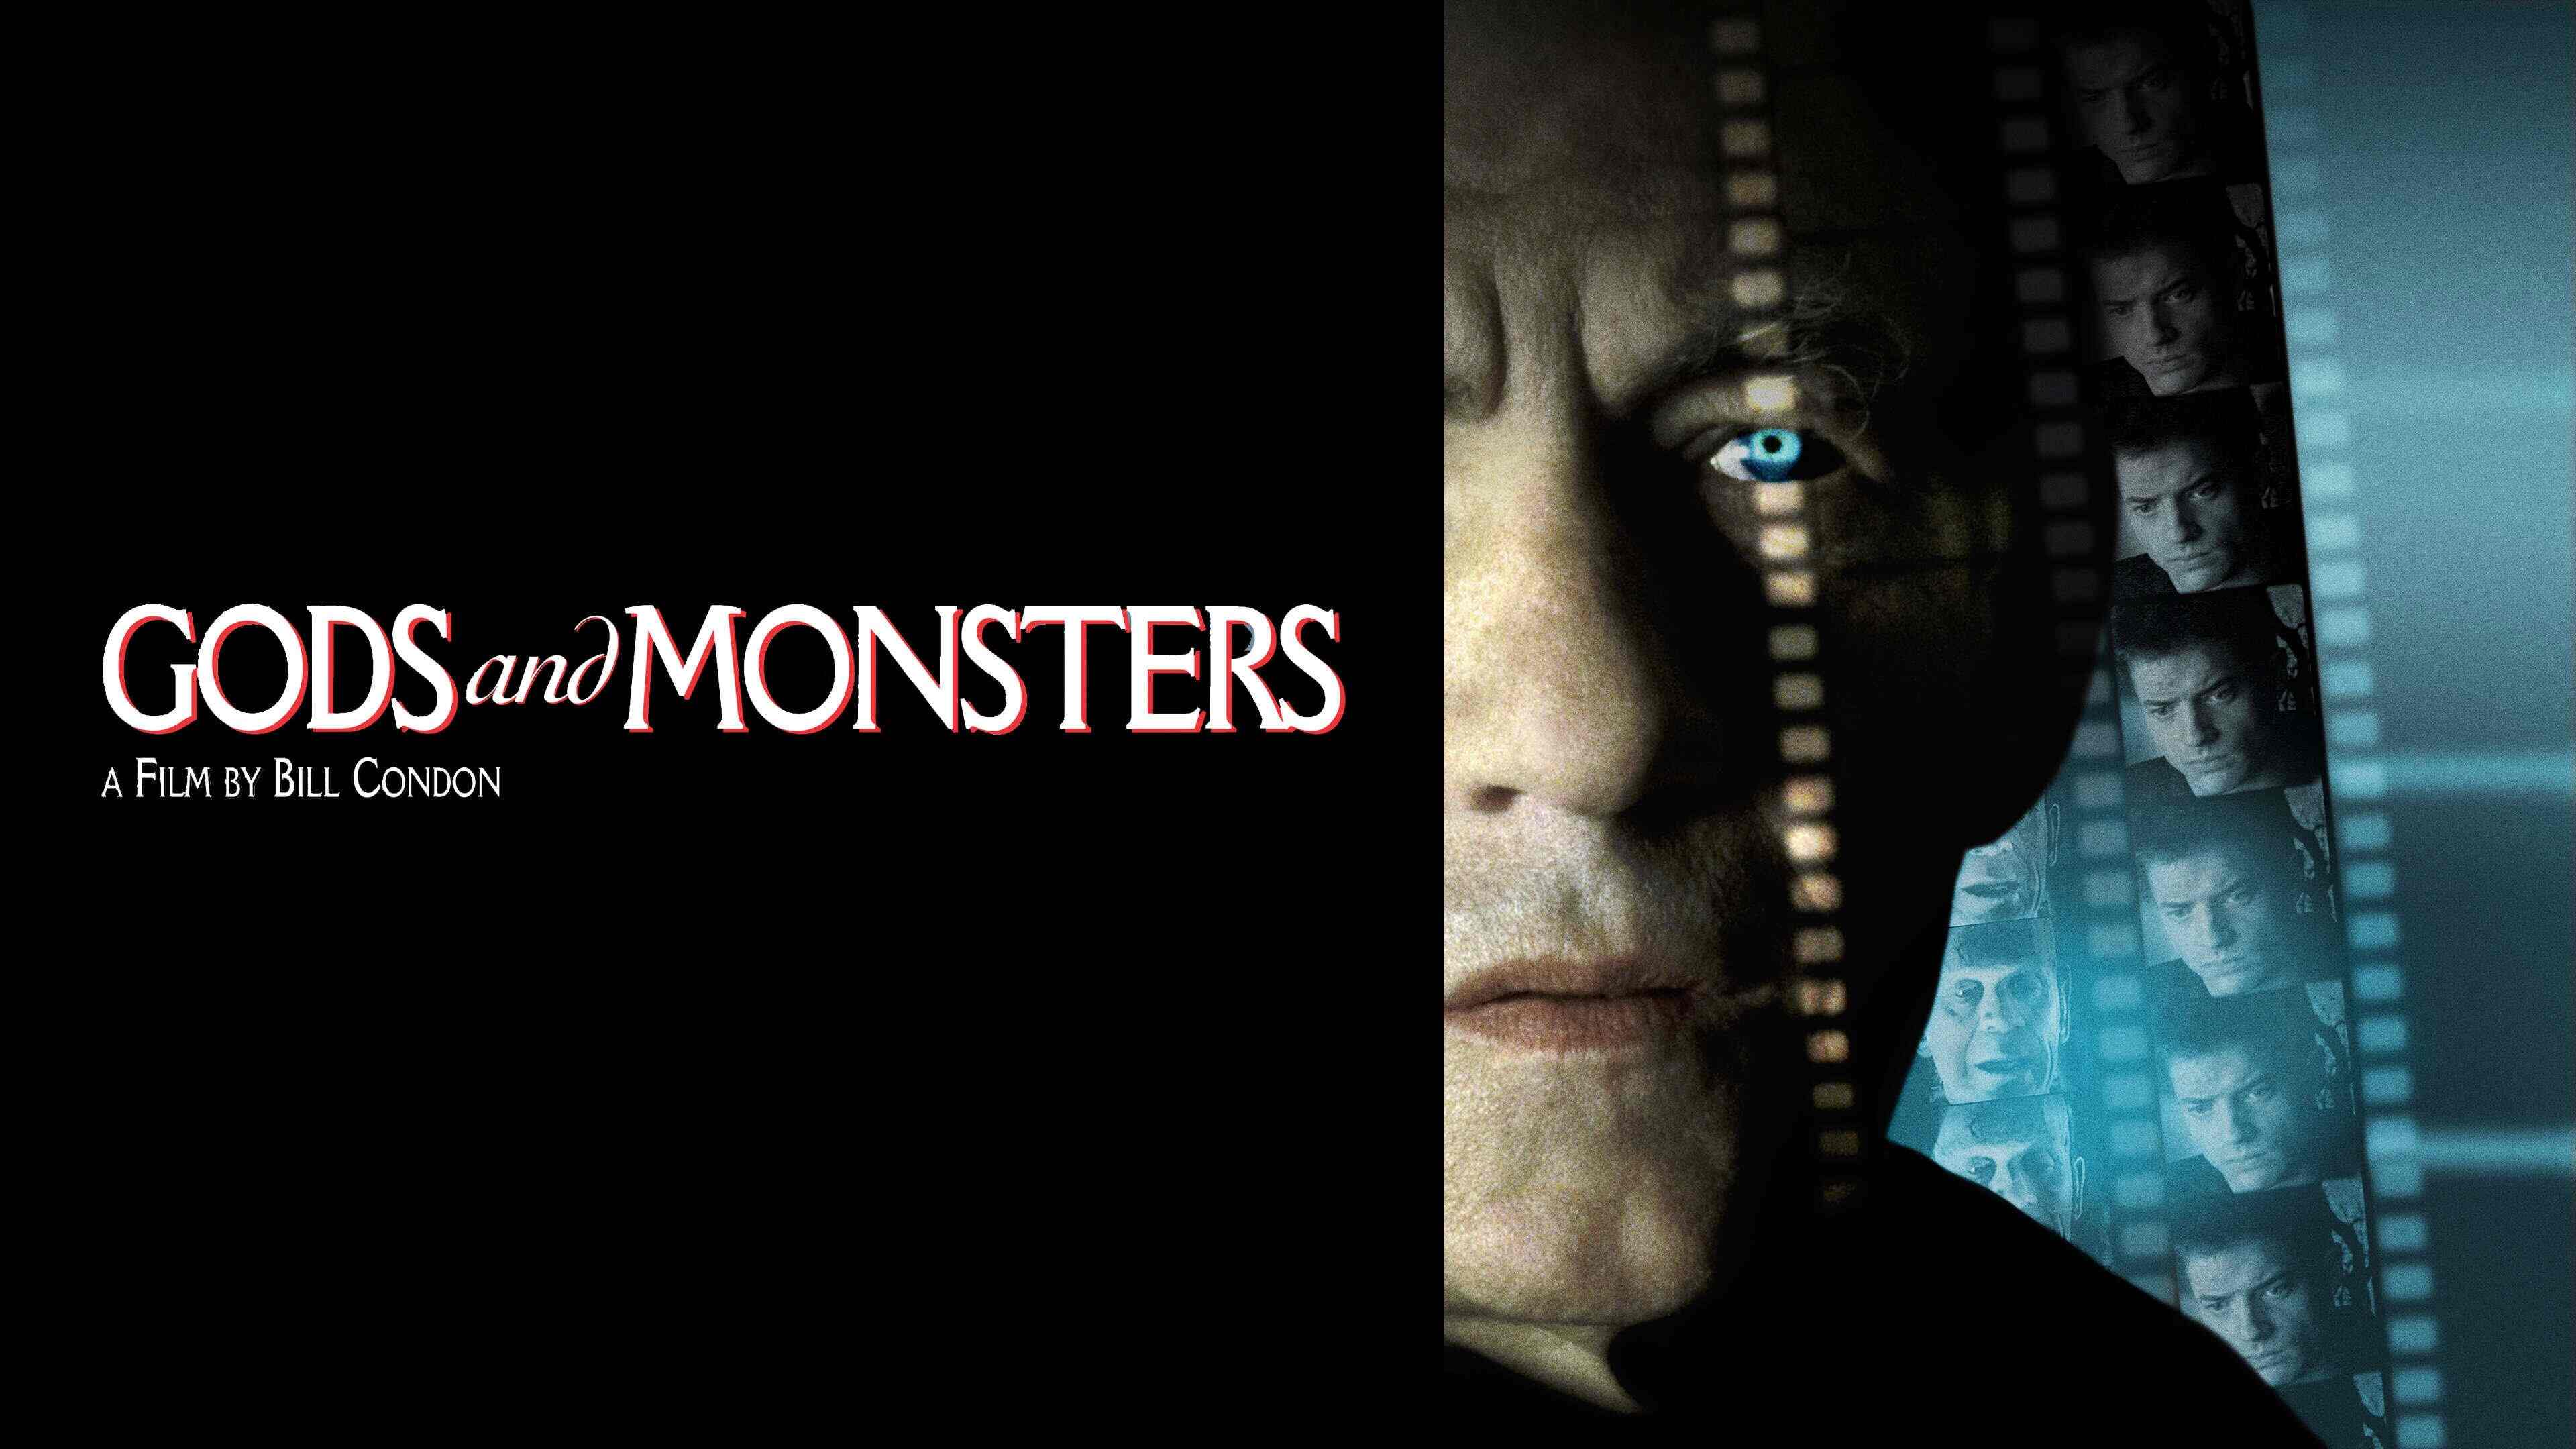 46-facts-about-the-movie-gods-and-monsters